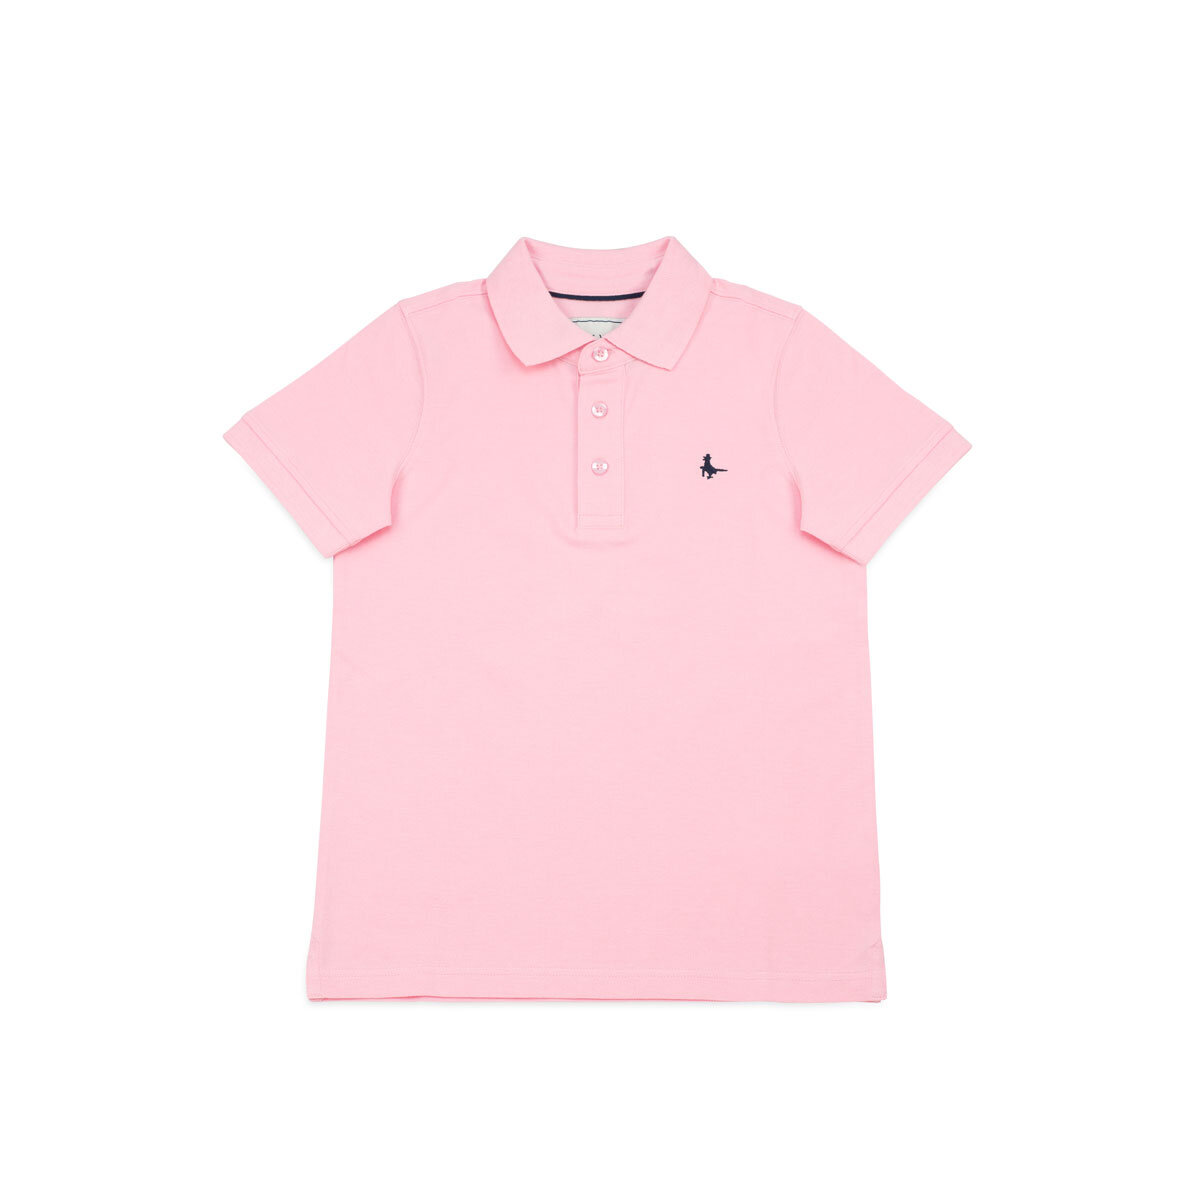 Jack Wills Youth Polo in Pink